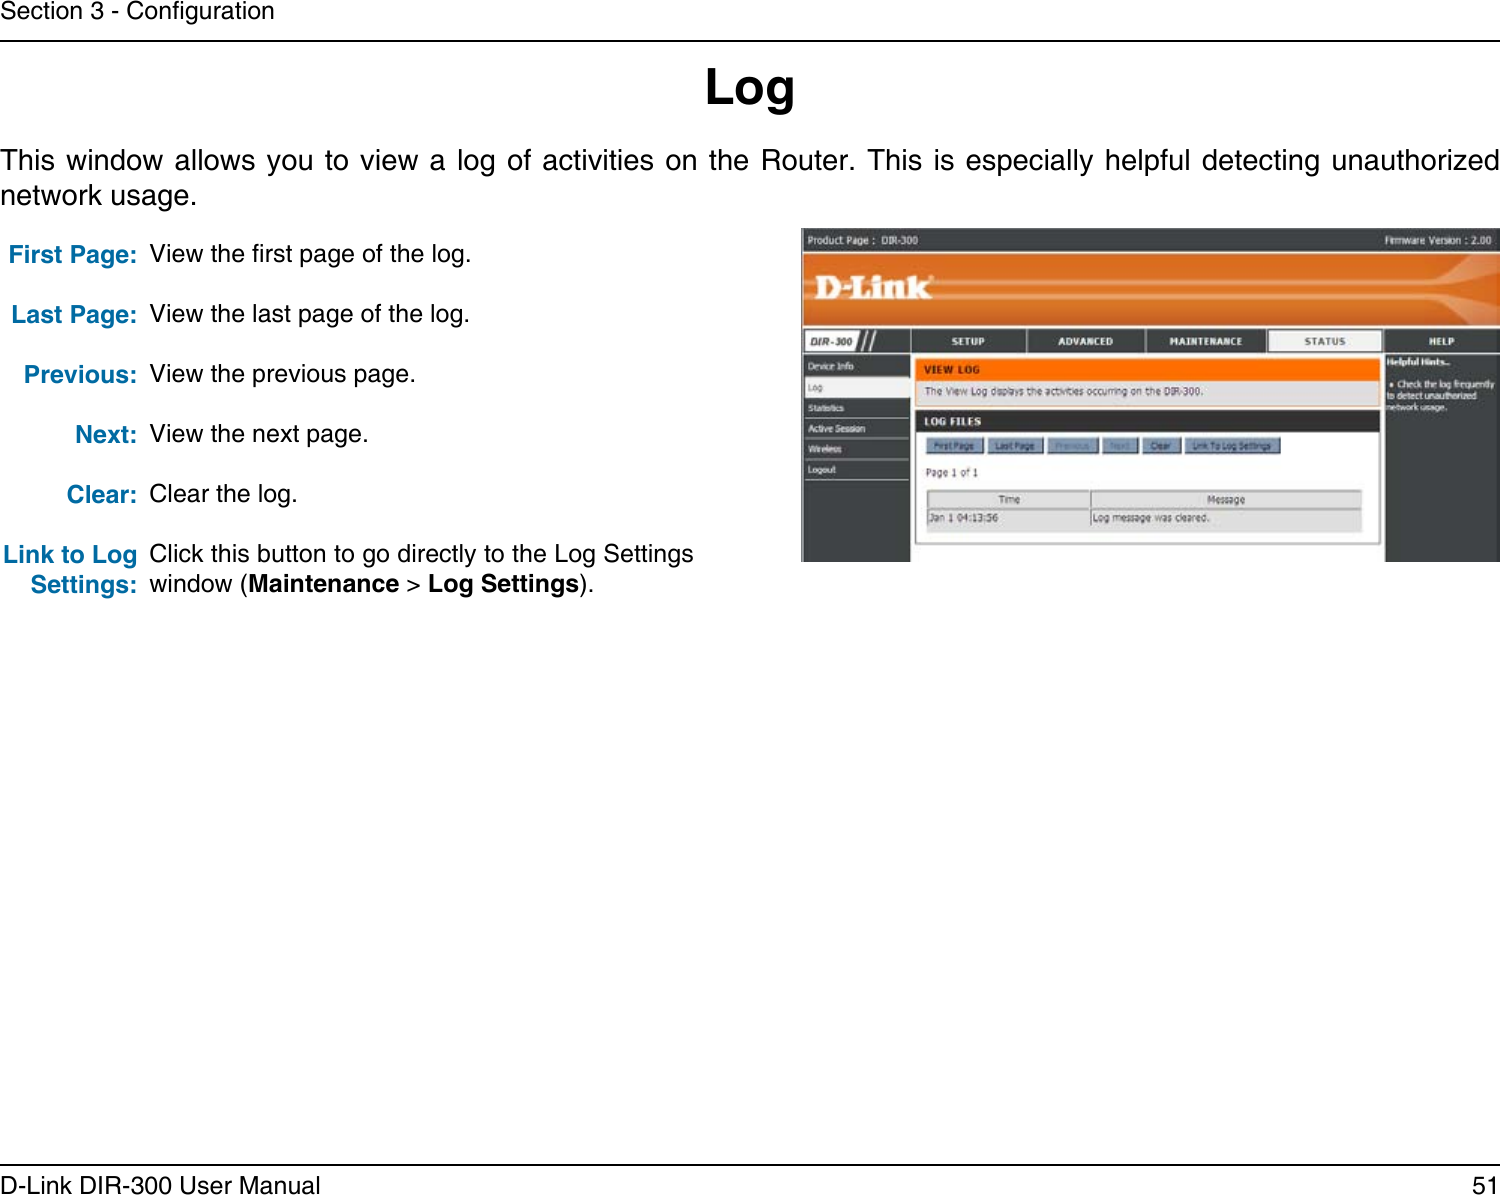 51D-Link DIR-300 User ManualSection 3 - CongurationLogFirst Page:Last Page:Previous:Next:Clear:Link to Log Settings:View the rst page of the log.View the last page of the log.View the previous page.View the next page.Clear the log.Click this button to go directly to the Log Settings window (Maintenance &gt; Log Settings).This window allows you to view a log of activities on  the Router. This is especially helpful detecting unauthorized network usage.